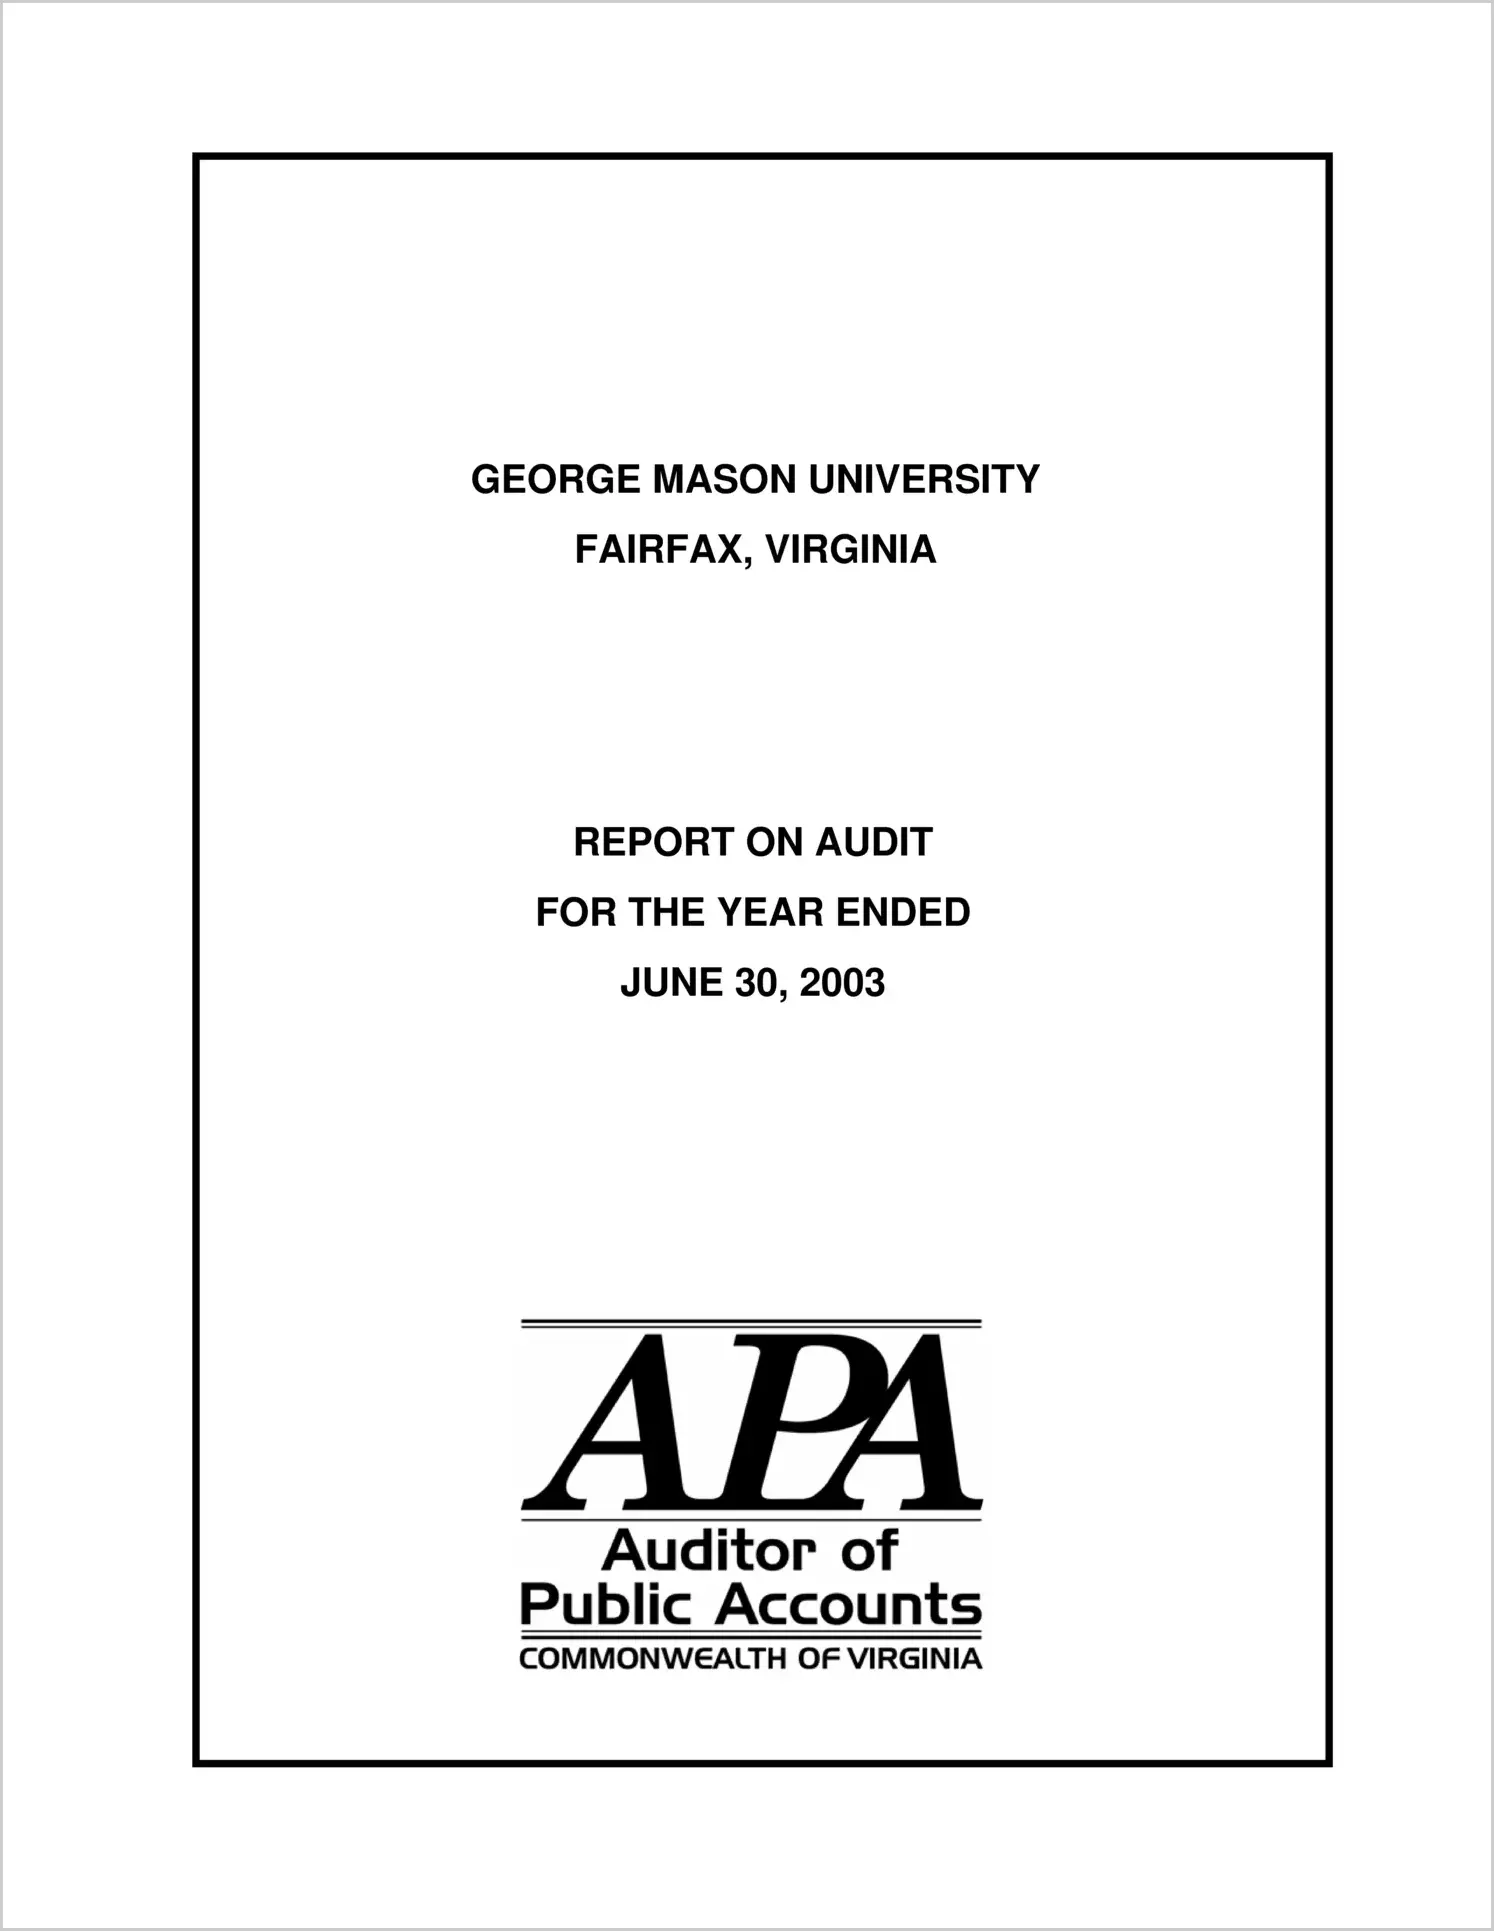 George Mason University for the year ended June 30, 2003